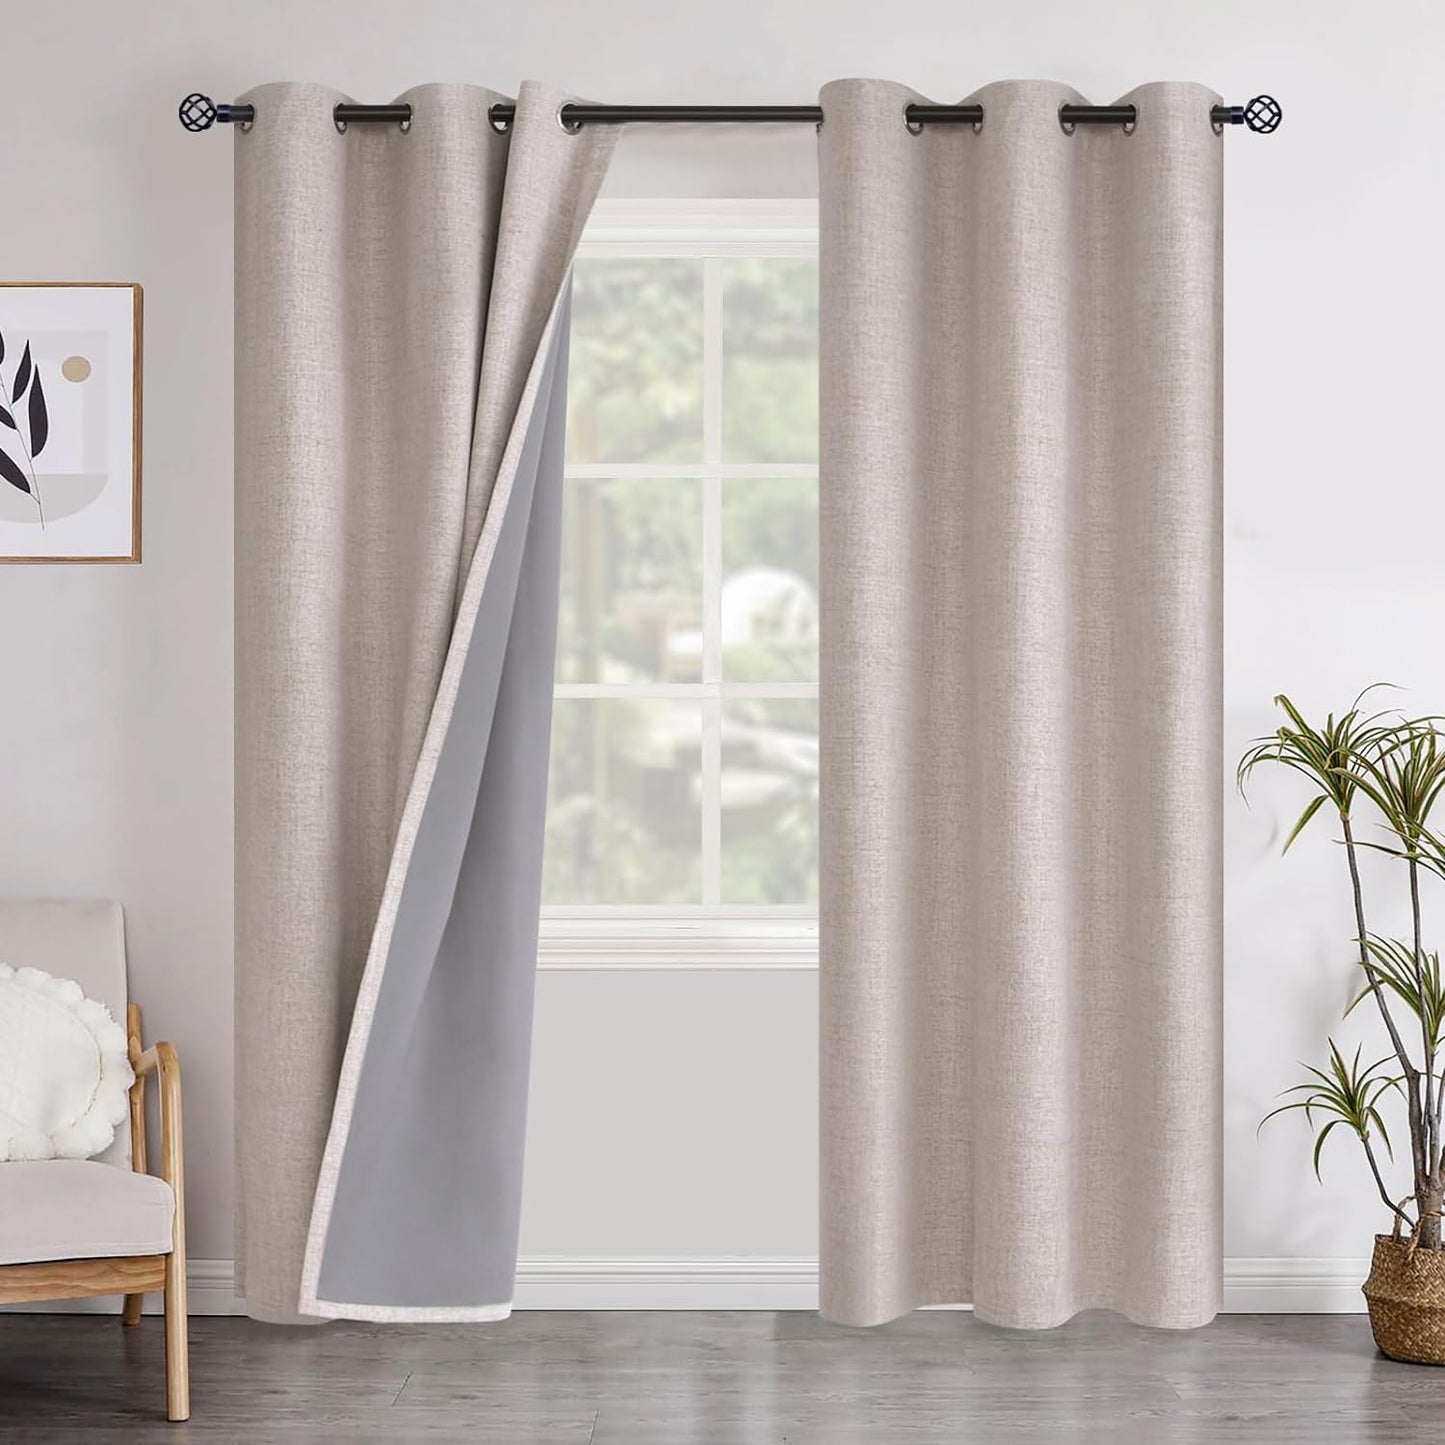 Youngstex Linen Blackout Curtains 63 Inch Length, Grommet Darkening Bedroom Curtains Burlap Linen Window Drapes Thermal Insulated for Basement Summer Heat, 2 Panels, 52 X 63 Inch, Beige  YoungsTex Beige 42W X 84L 